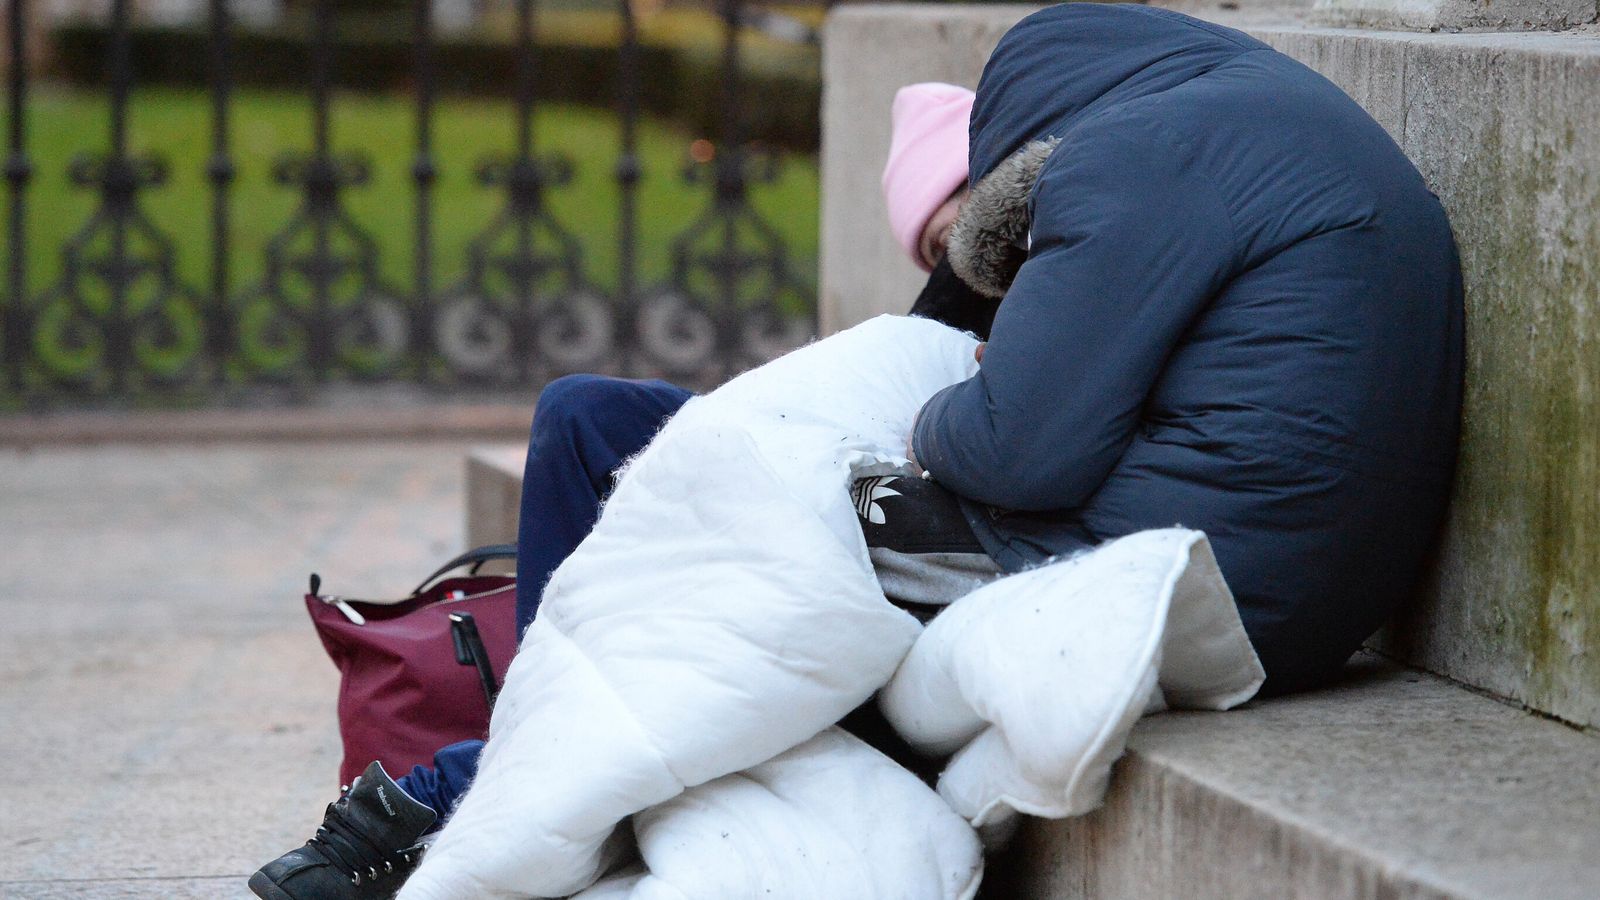 Government insists it 'will not criminalise' homeless people after bill backlash